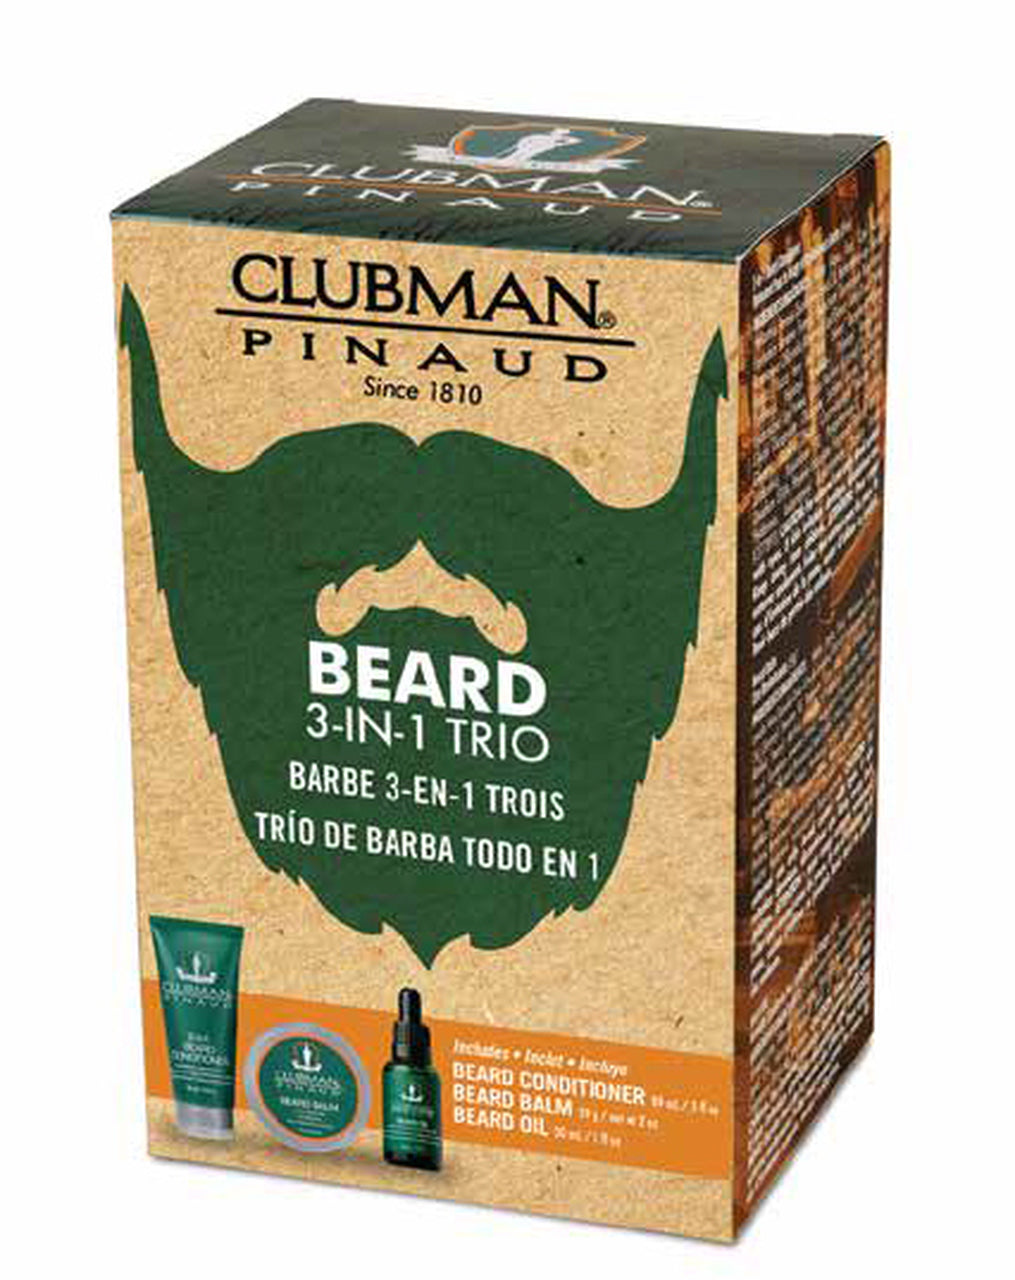 Clubman Beard 3 in 1 Trio - Beard Balm, Oil and 2 in 1 Conditioner - Hot Brands Store 